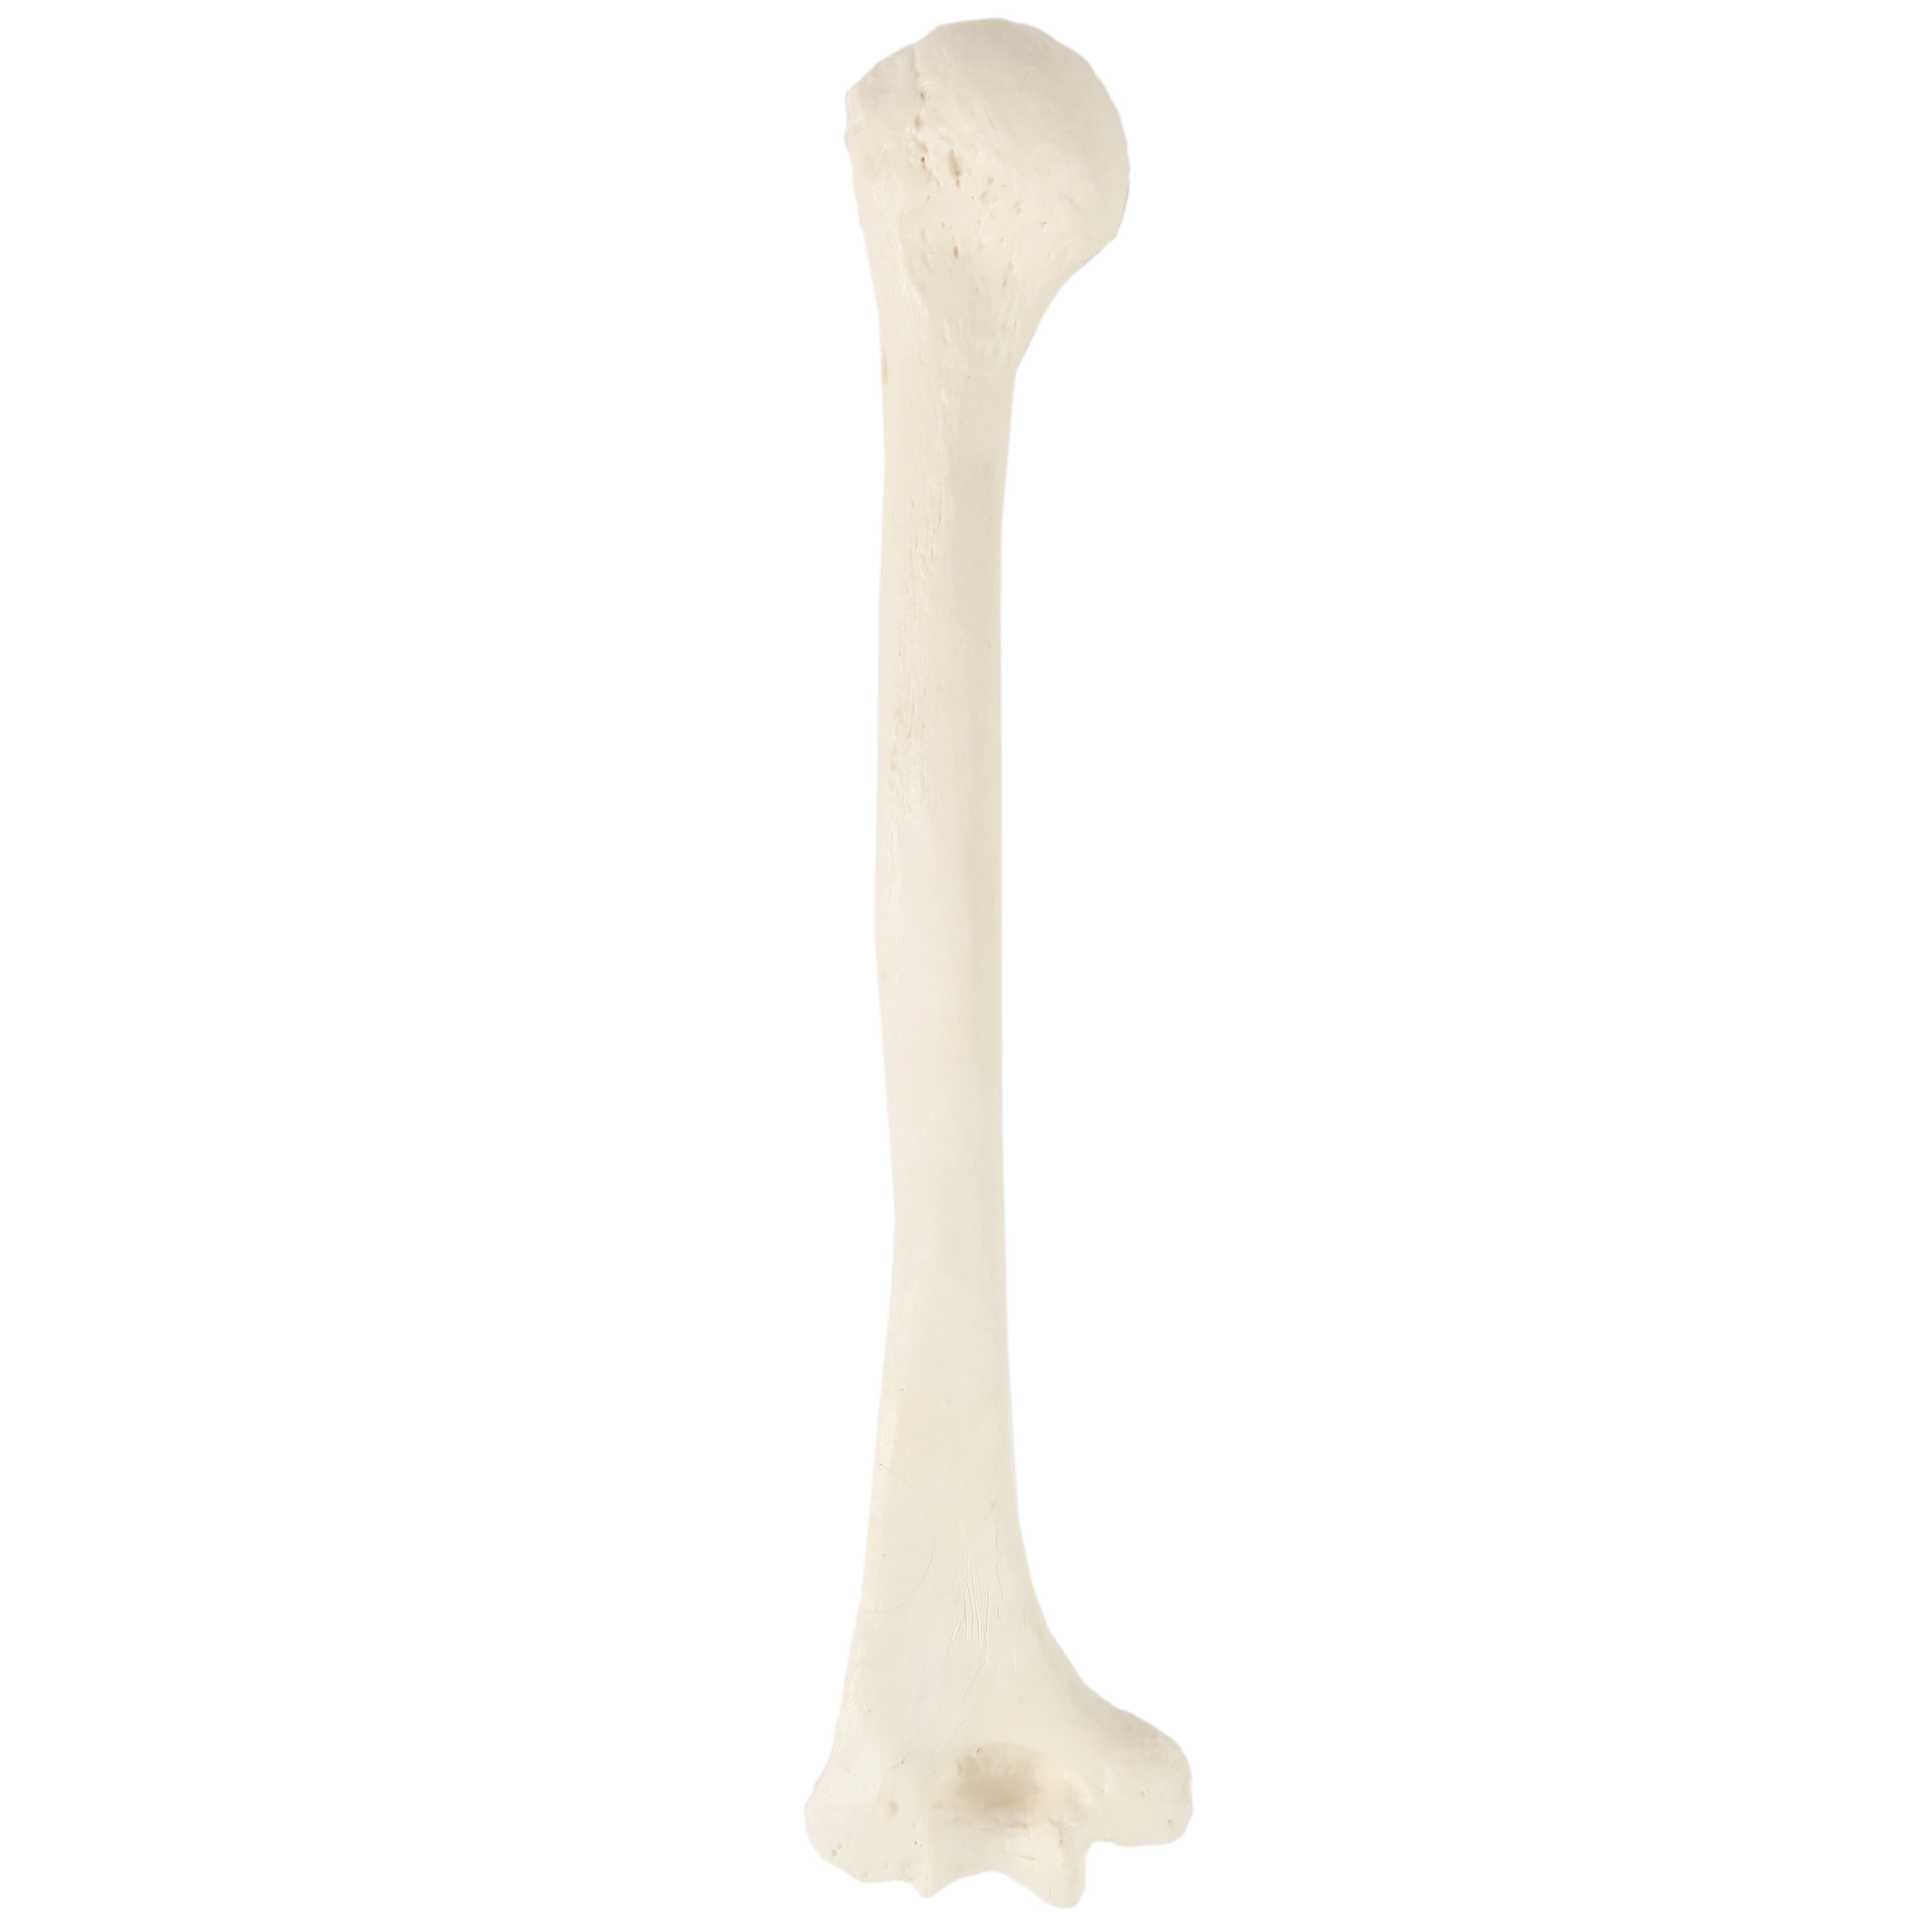  Human Humerus 2 Pieces, Earth-Tone Brown Relic, Left and Right  Arm Bones Replica Life Size for Anatomical - Medical School Studies :  Industrial & Scientific